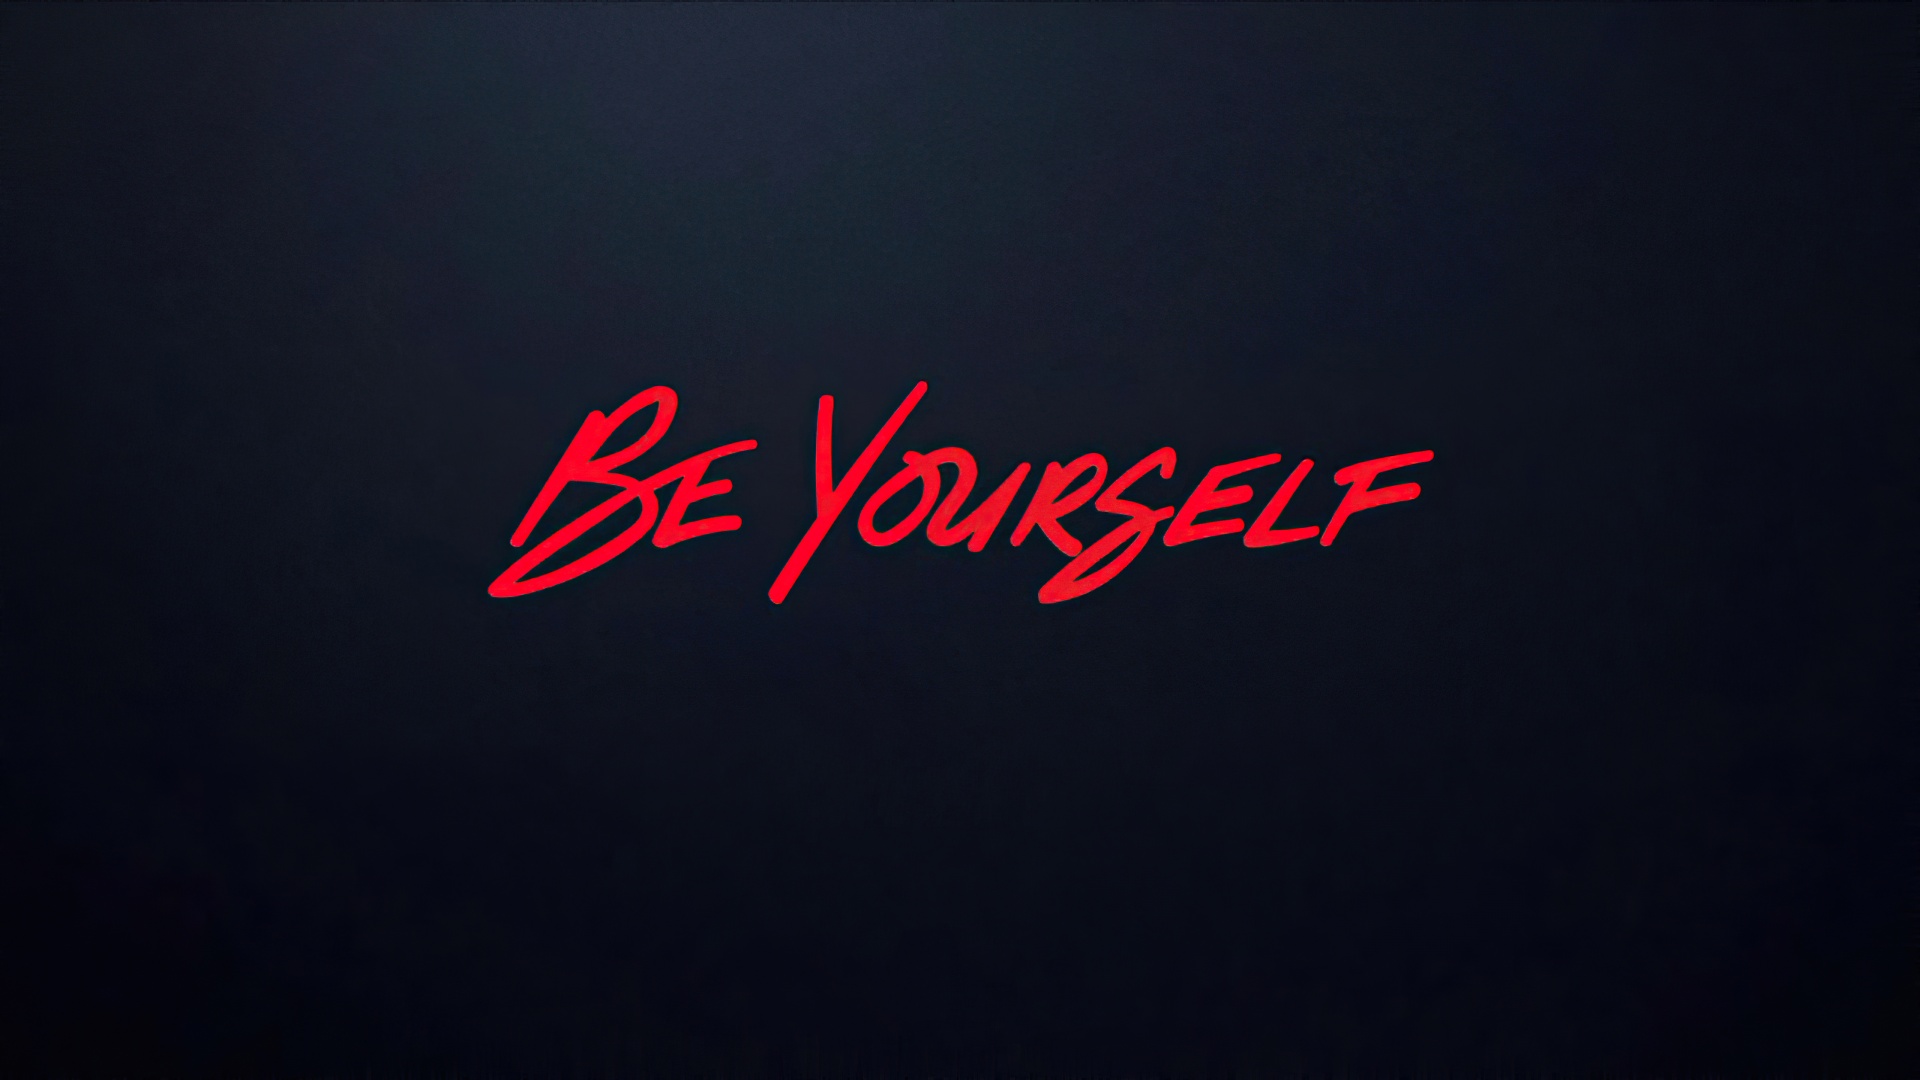 Be yourself 4K Wallpaper, Be You, Inspirational quotes, Dark background